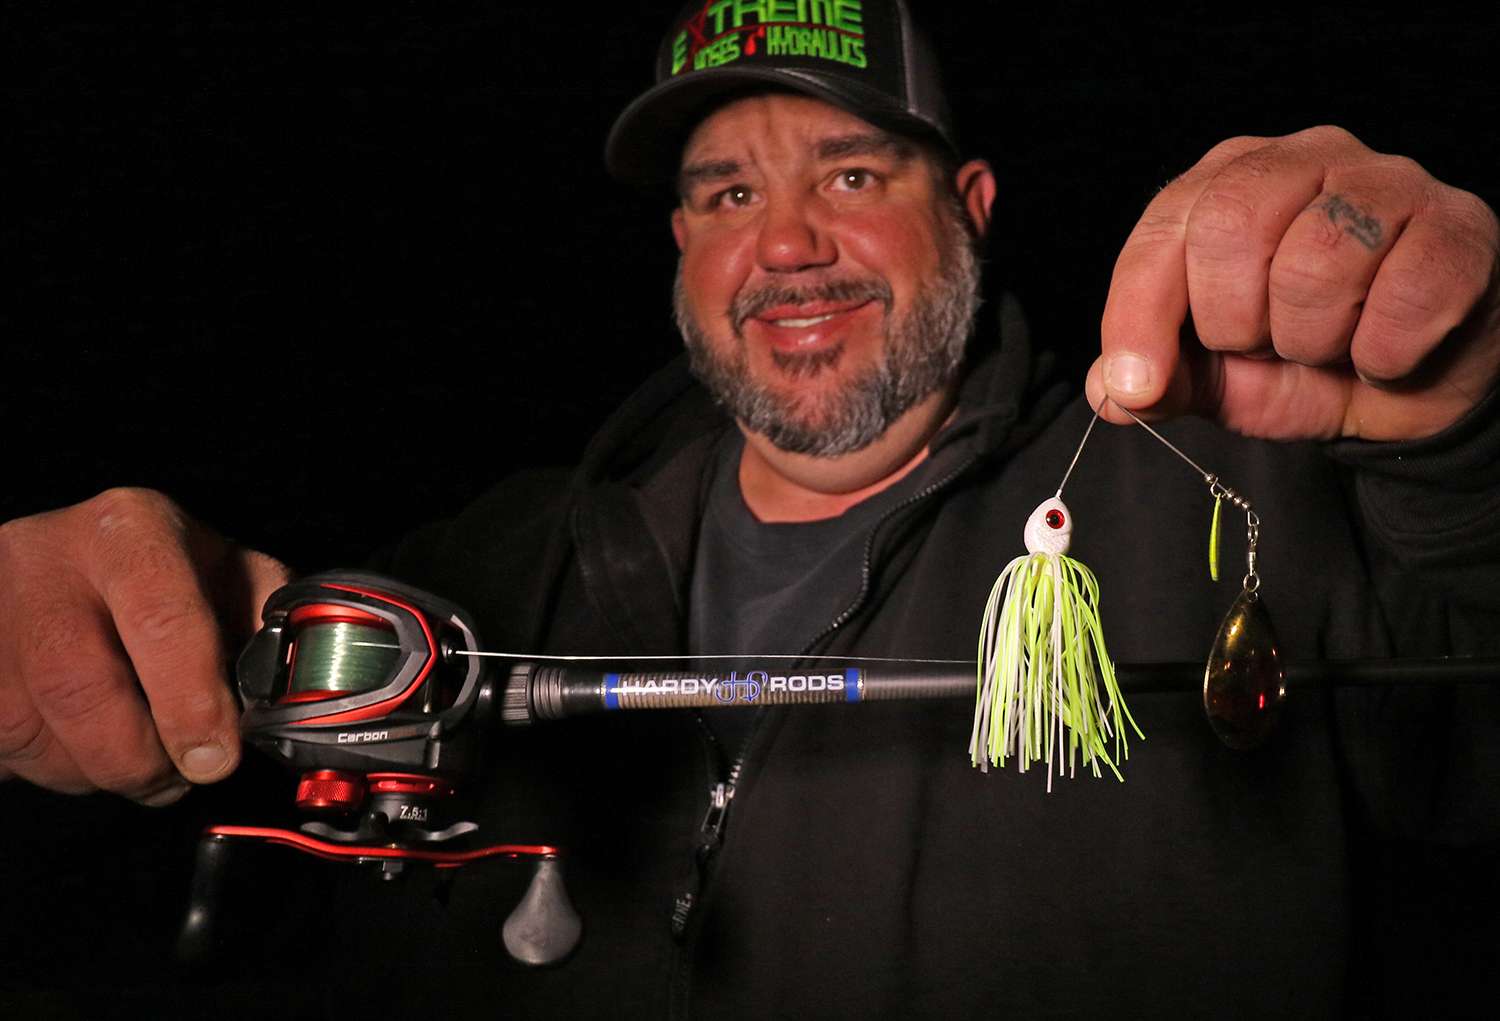 To finish twelfth Frank Talley used this 1/2-ounce Angler Assets Color Blade Spinnerbait. The bait featured a Hot Chartreuse skirt and double Indiana chartreuse and gold blades. 